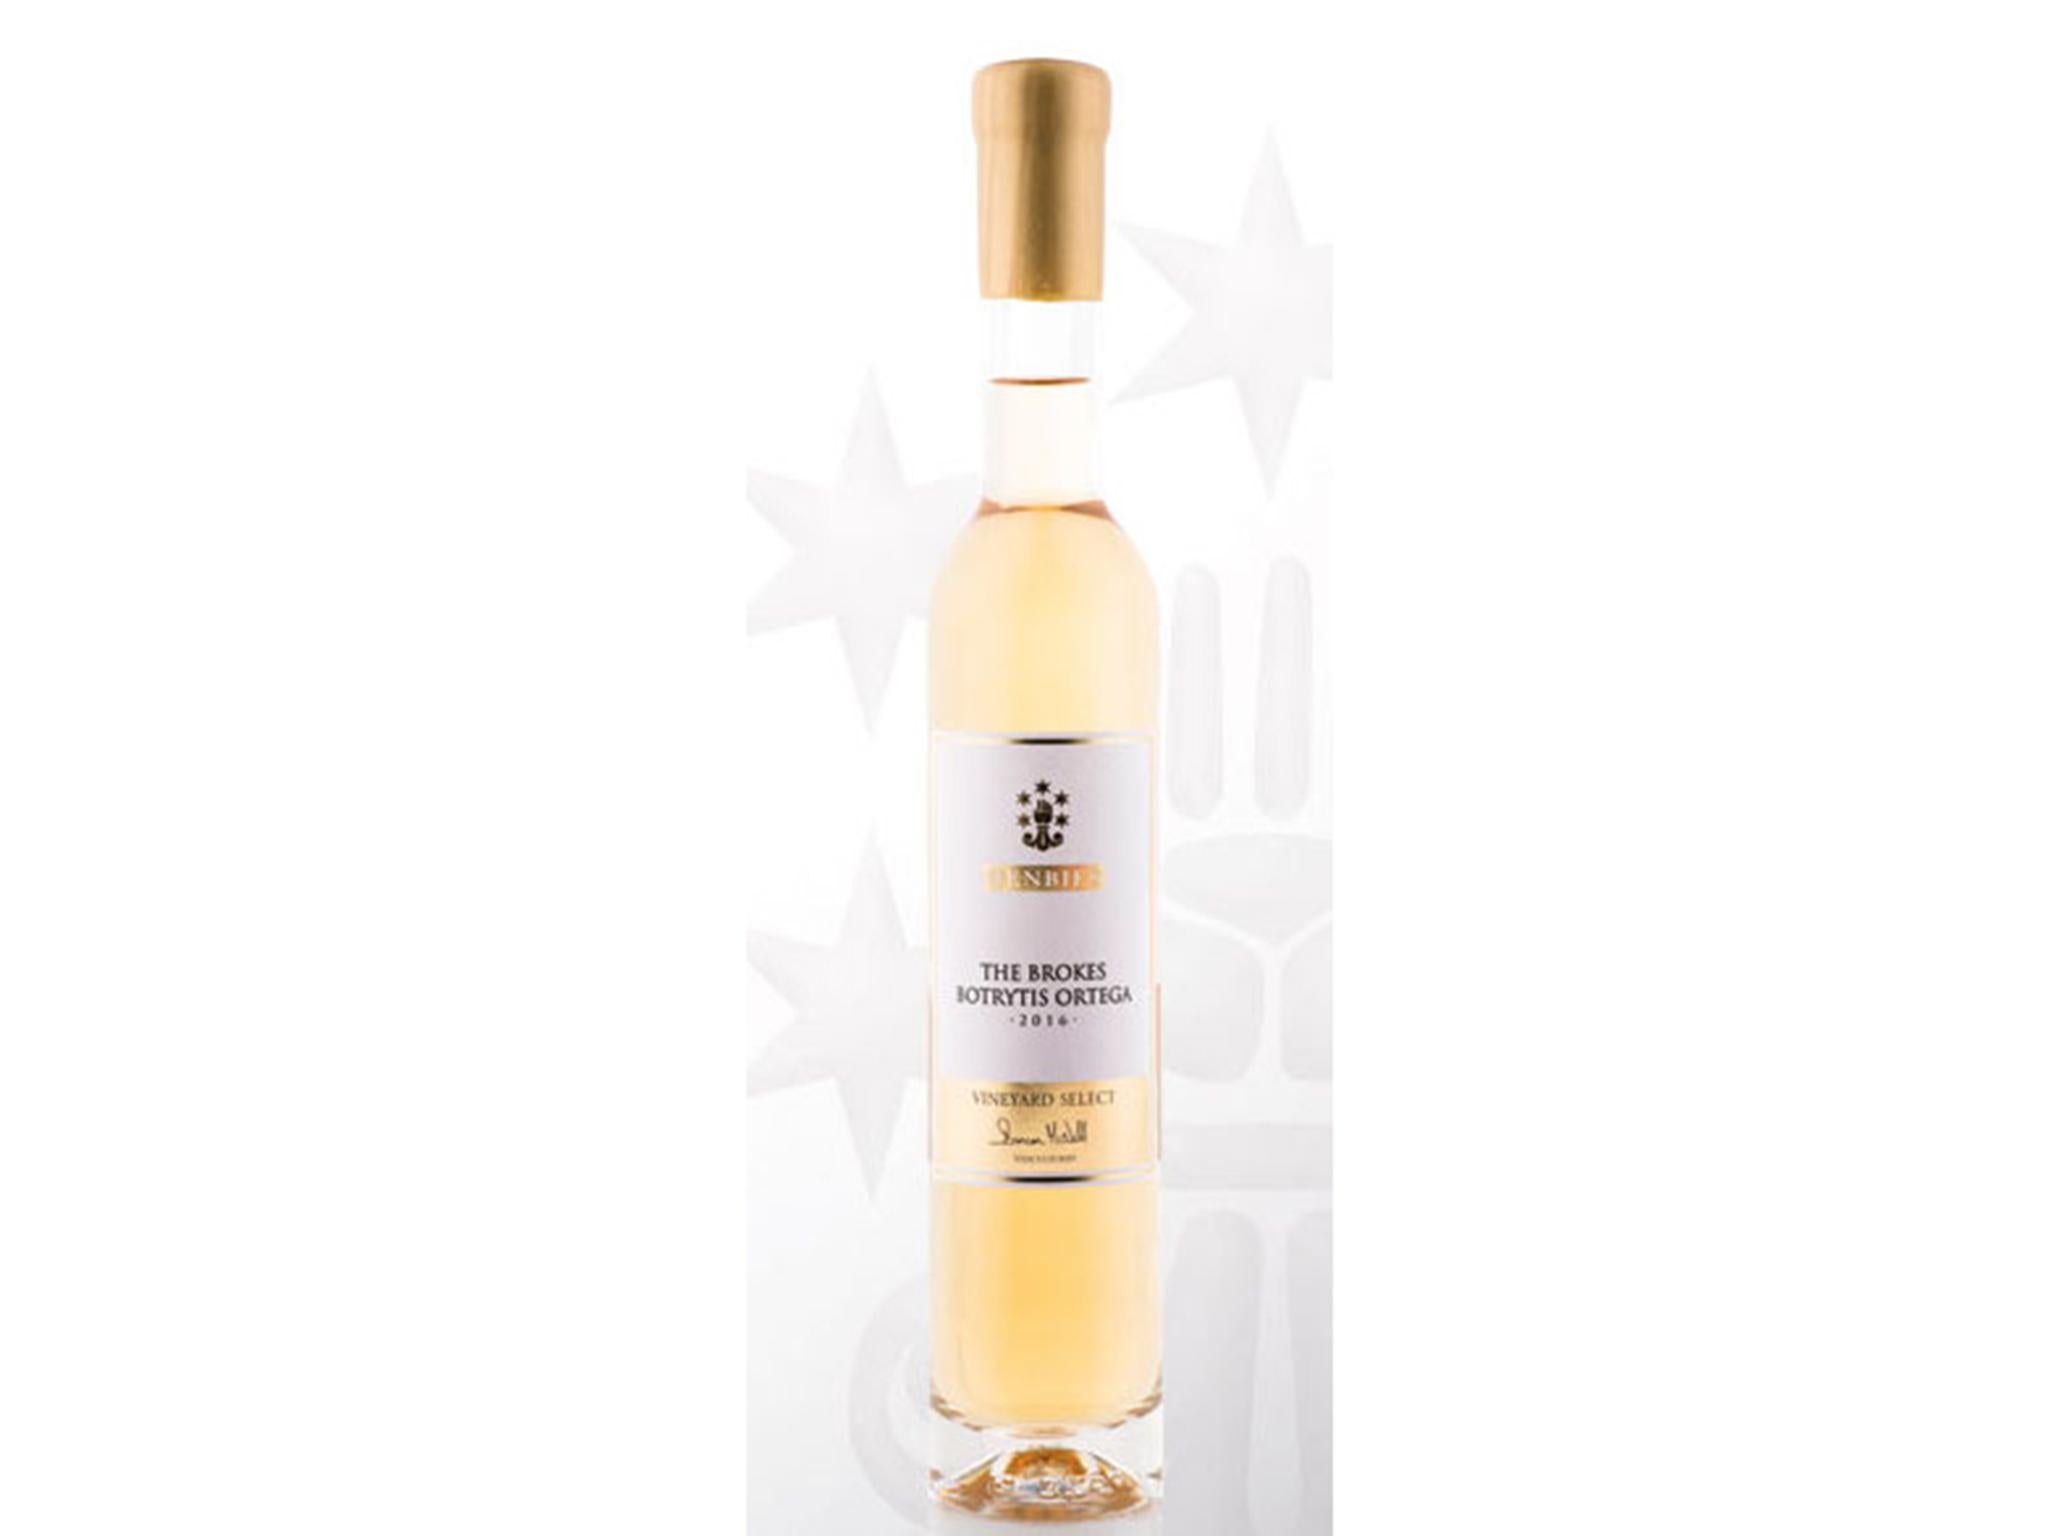 An expensive, but a worthwhile investment, a bottle of this Brokes Botrytis Ortega 2016 is the perfect dessert wine (Denbies)